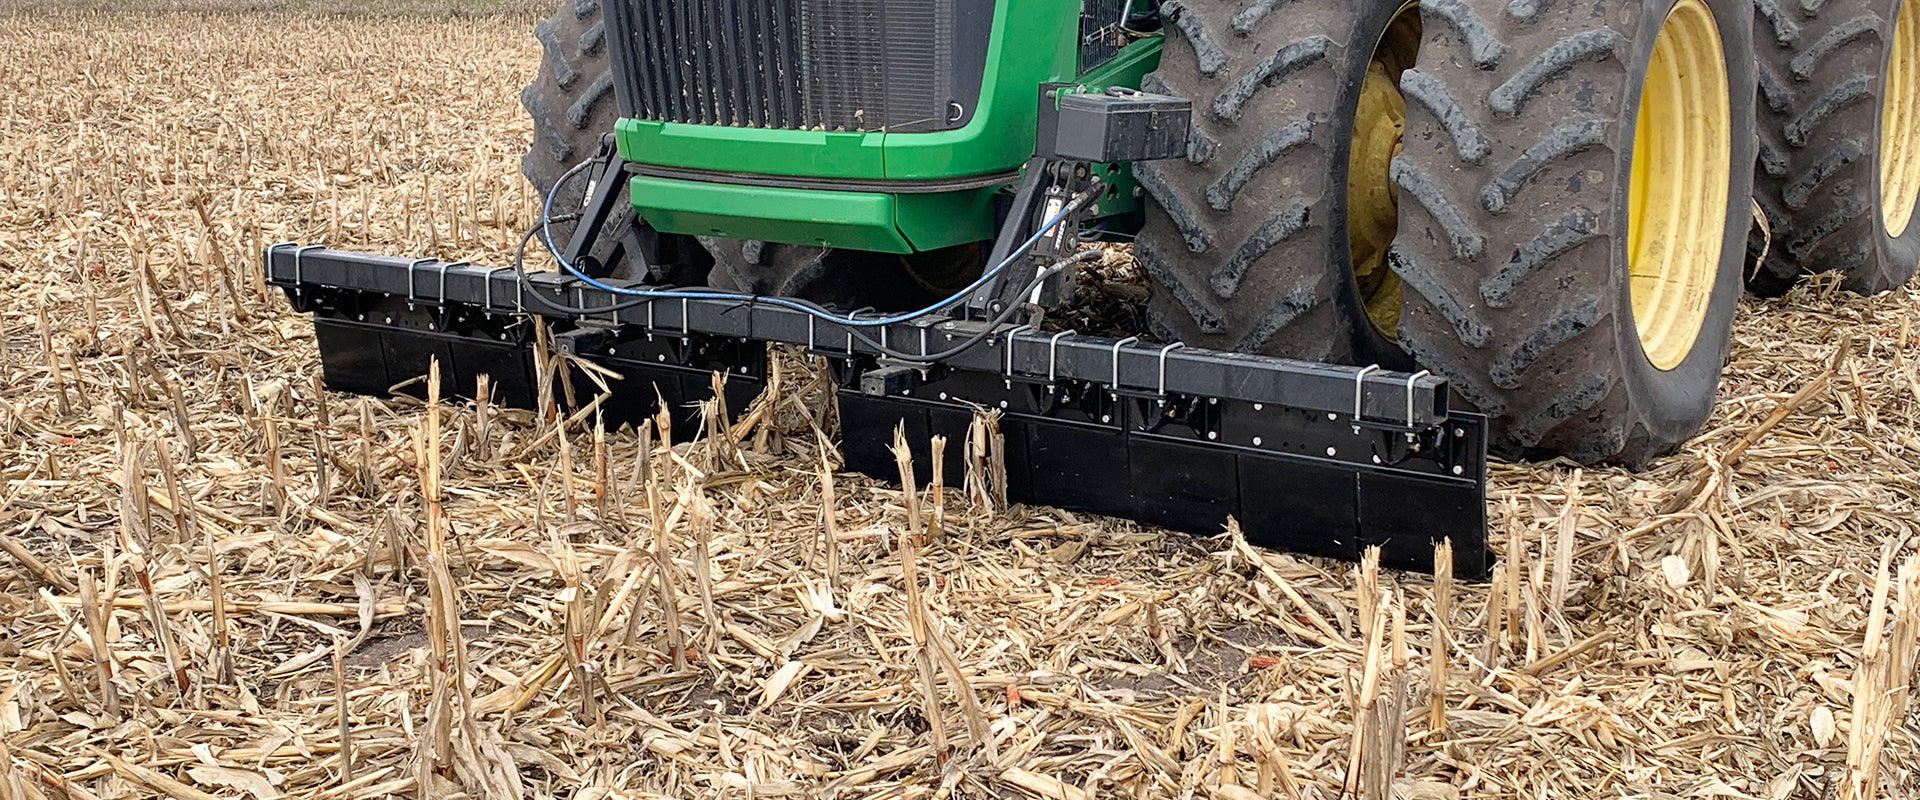 May Wes G4 Tractor Stalk Stompers installed on John Deere tractor